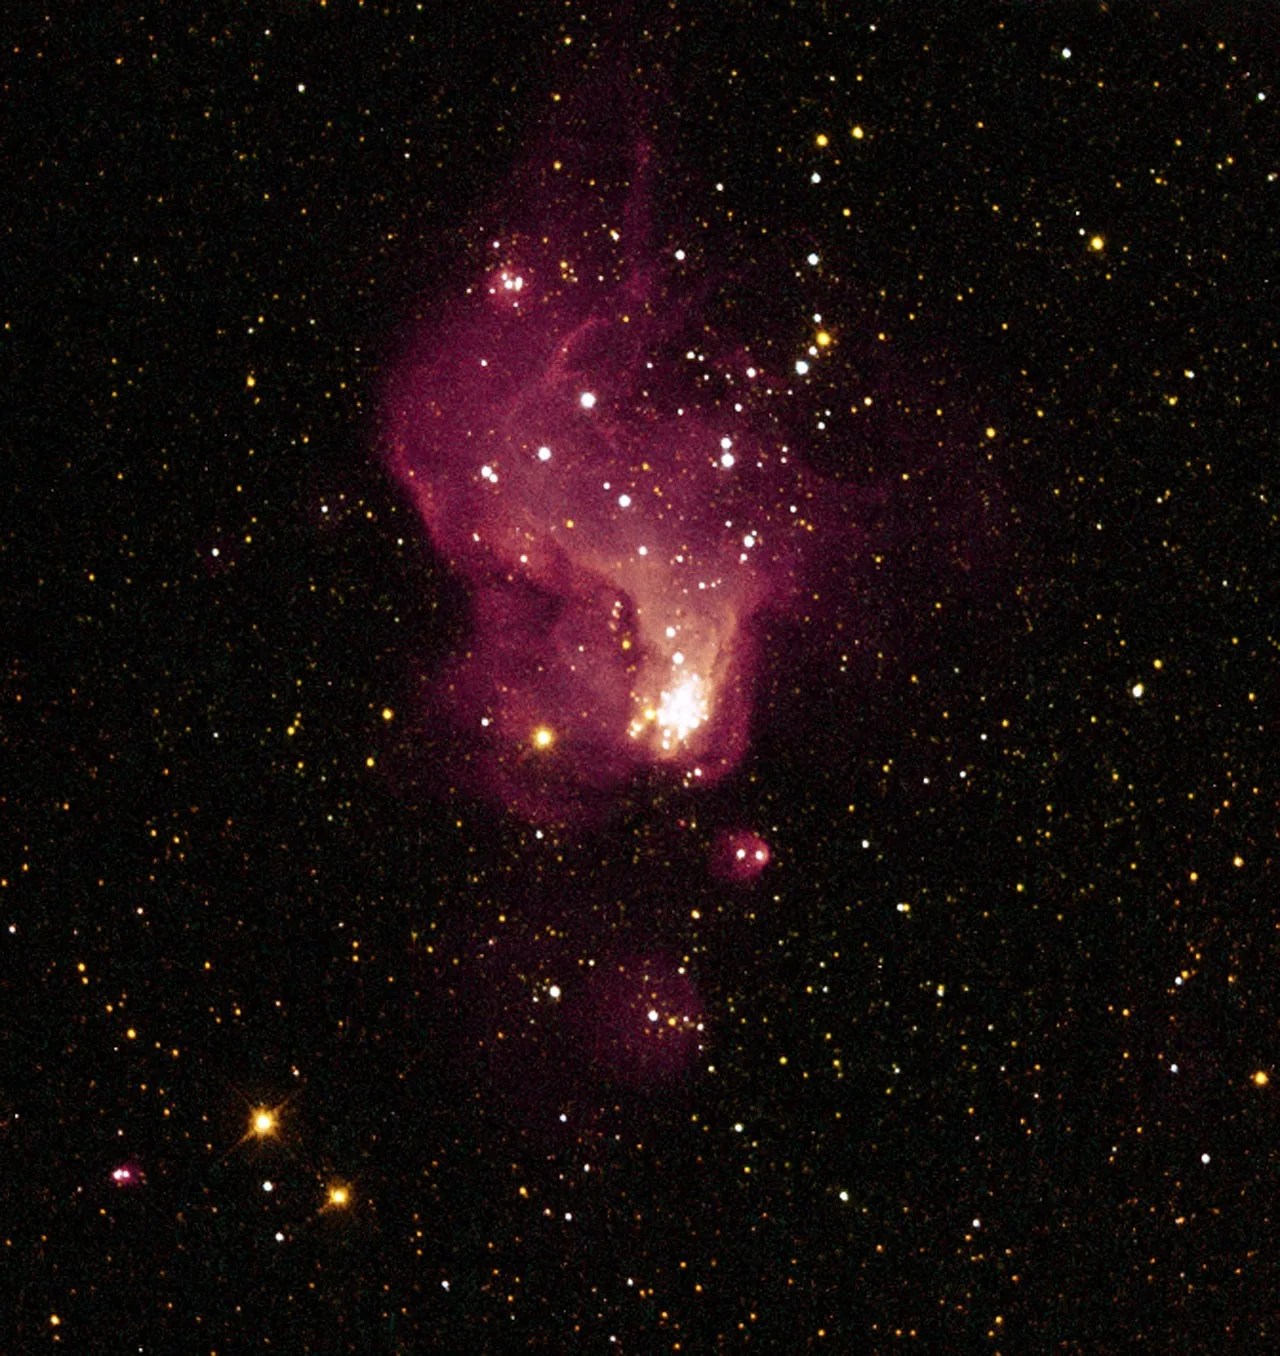 This pinkish-red glowing gas cloud resembles curling flames from a campfire. A faint tail of gas trailing off the top of the cloud sits opposite a dense cluster of bright white and yellow stars at the bottom.